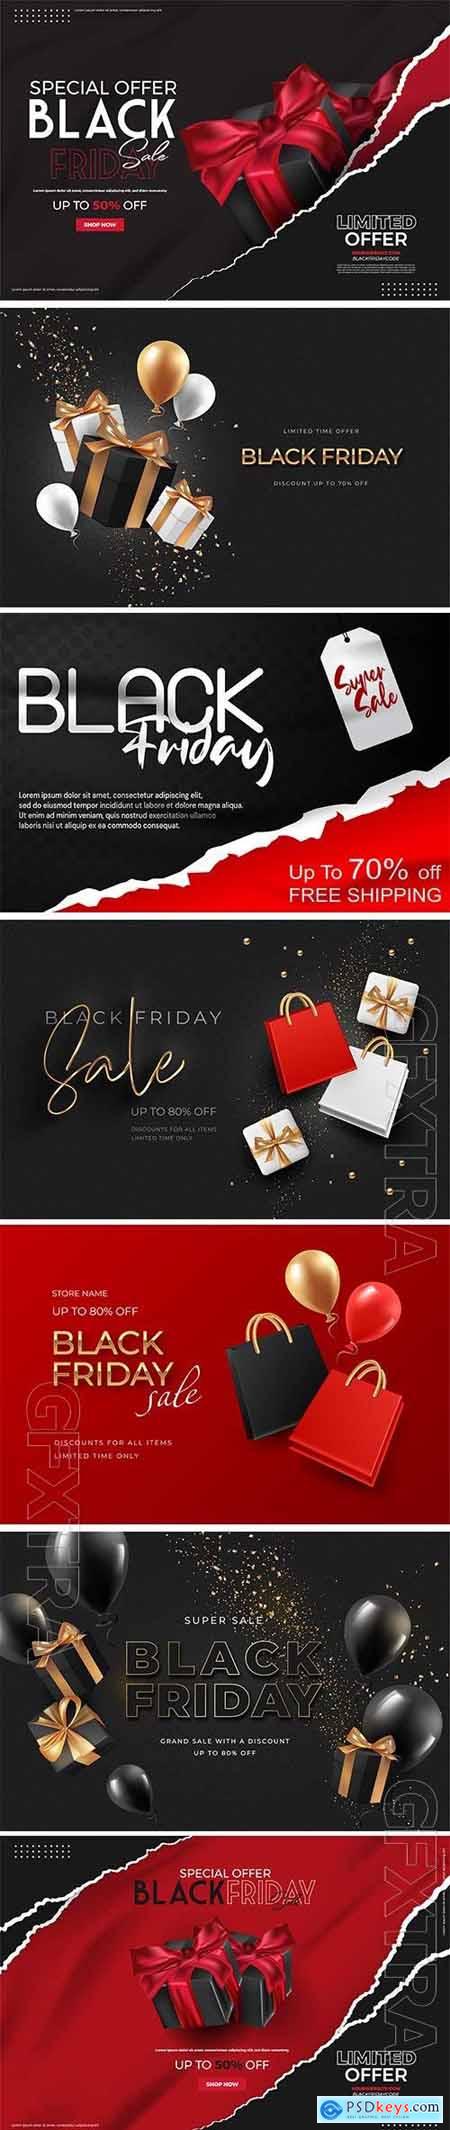 Black friday sale web banner vector template